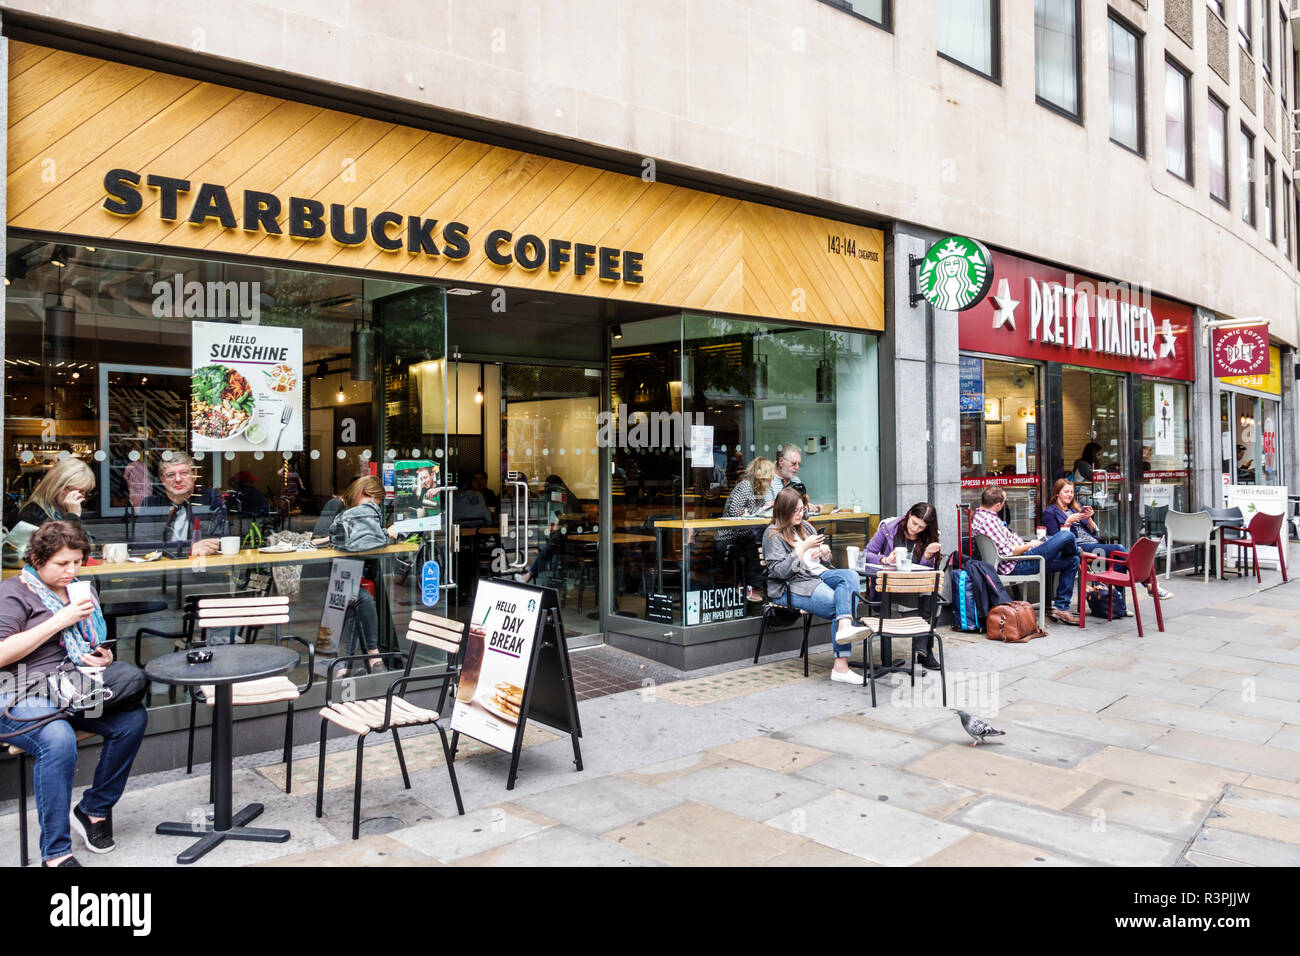 City of London England,United Kingdom UK,Great Britain British,Starbucks Coffee,American coffeehouse chain,cafe,sidewalk seating,exterior,tables,adult Stock Photo